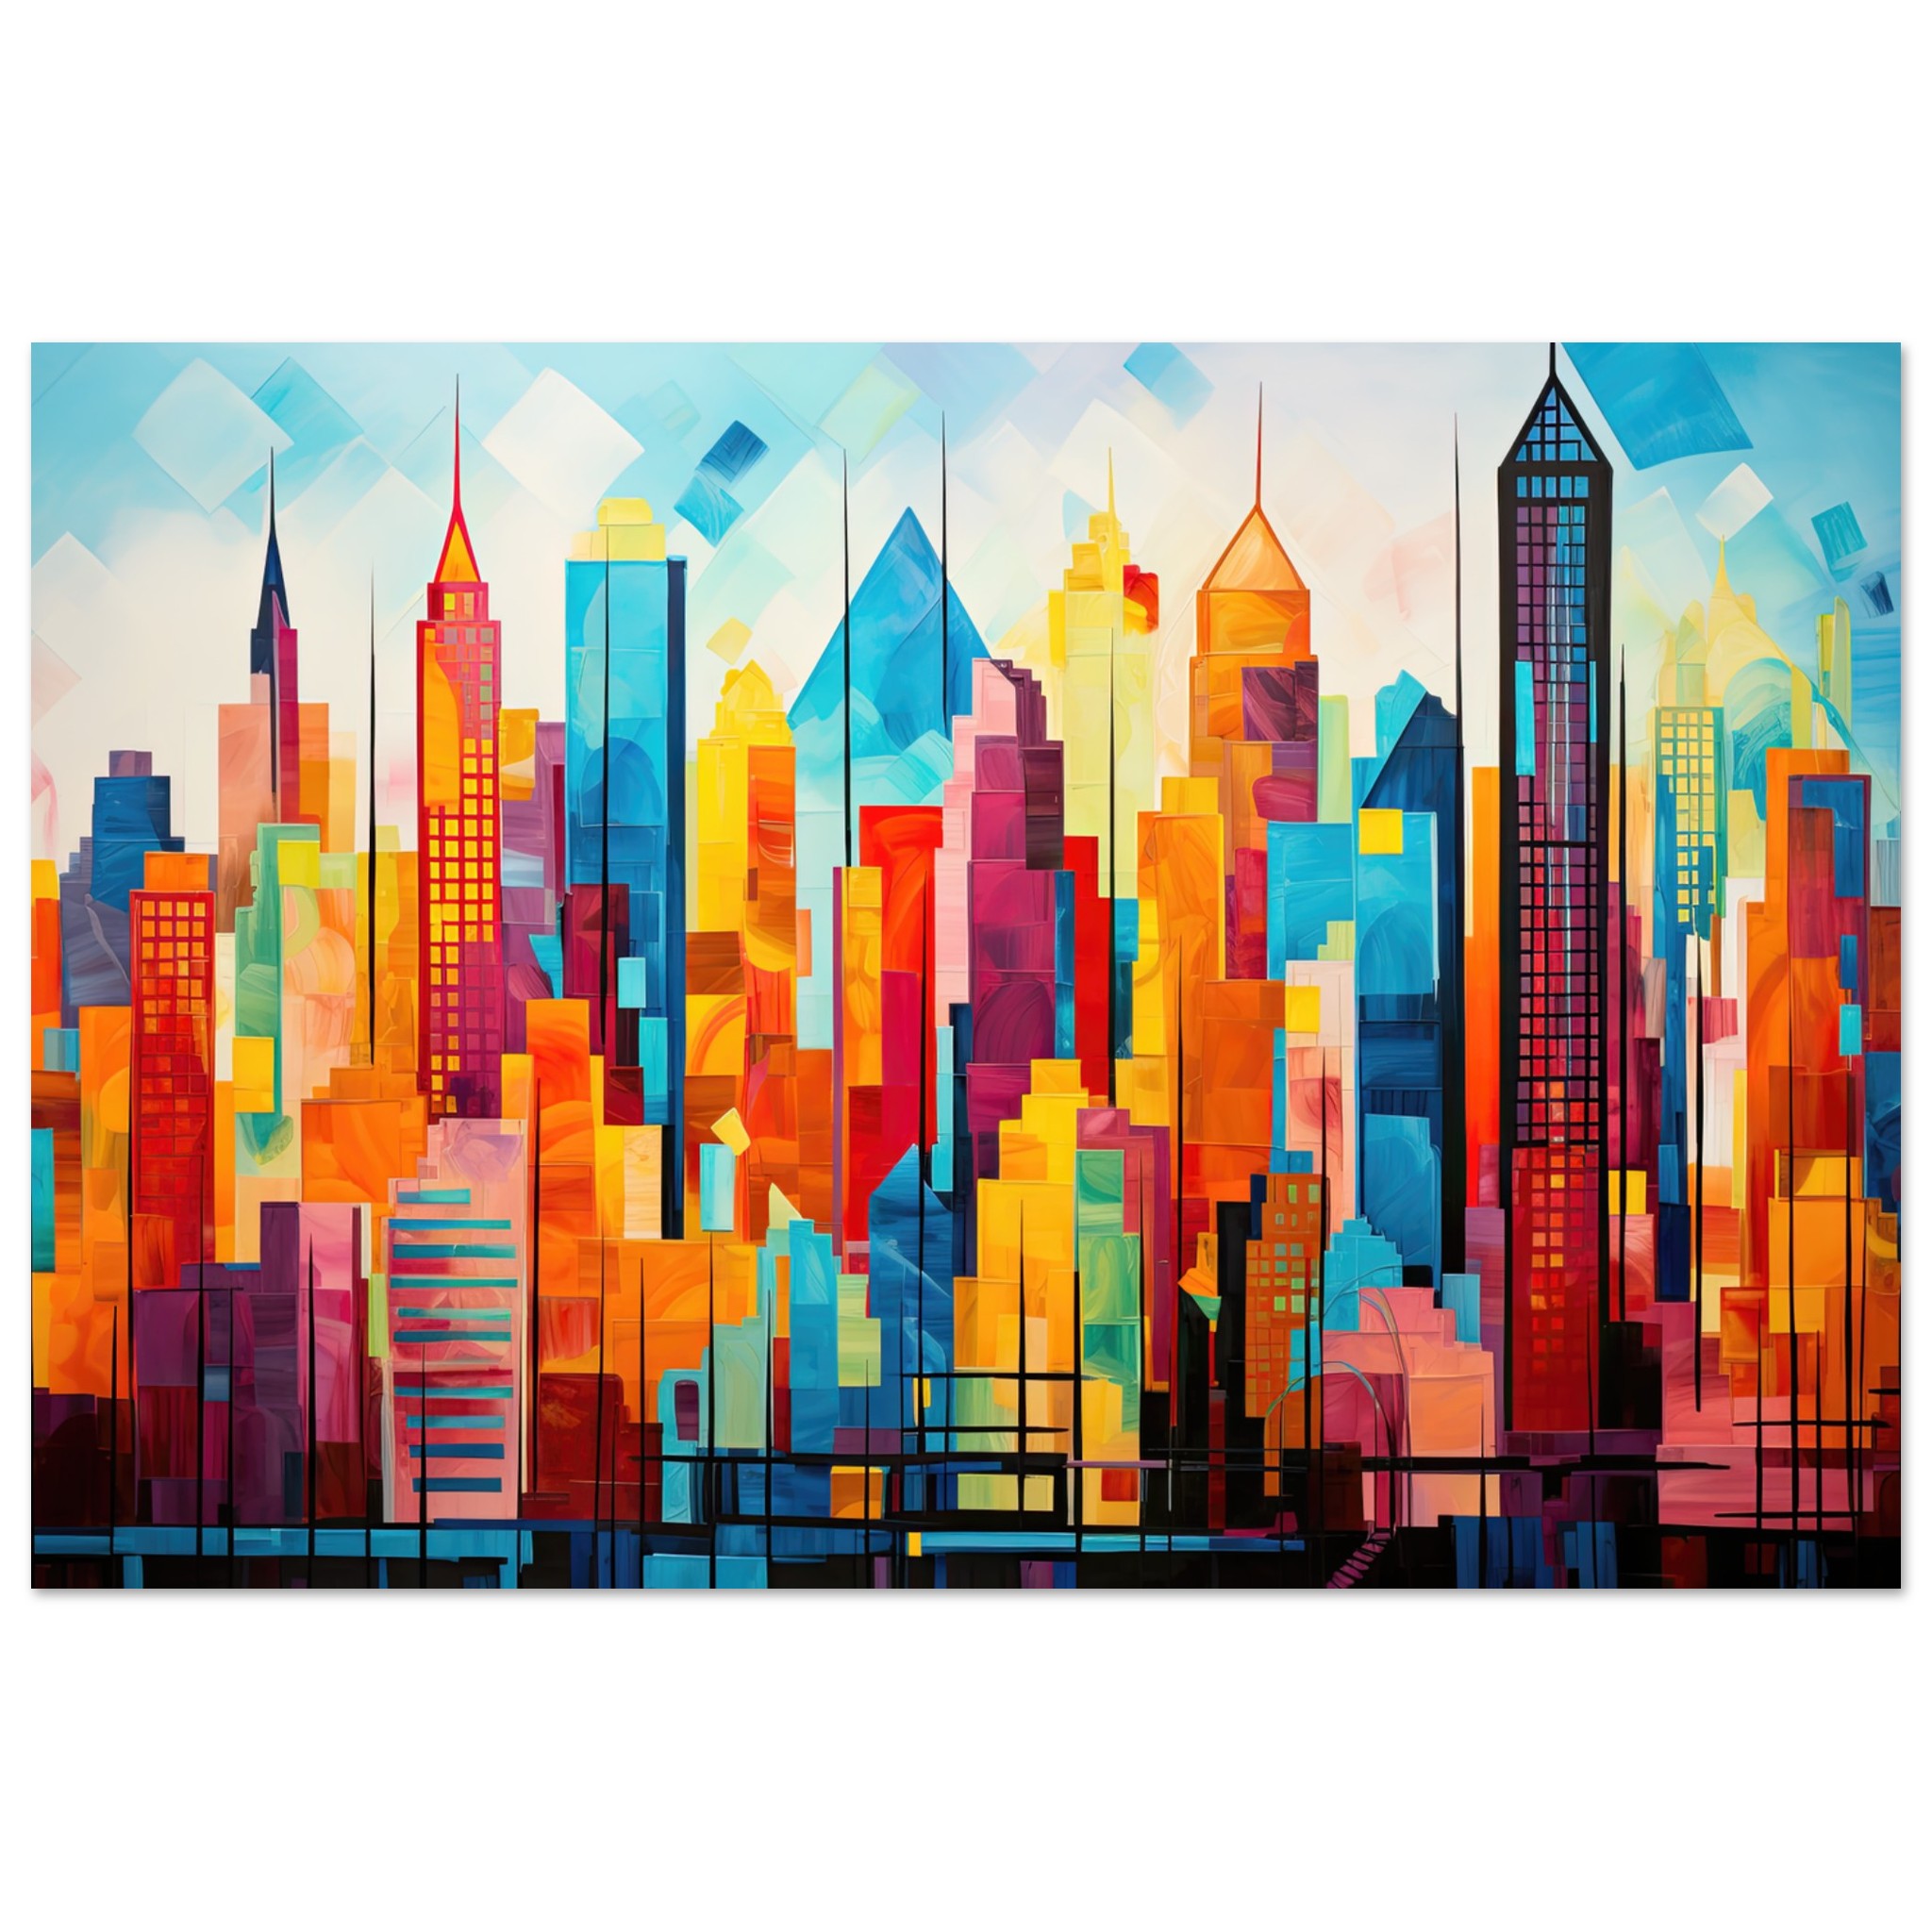 Colorful Abstract Cityscape Painted – Metal Print – 20×30 cm / 8×12″